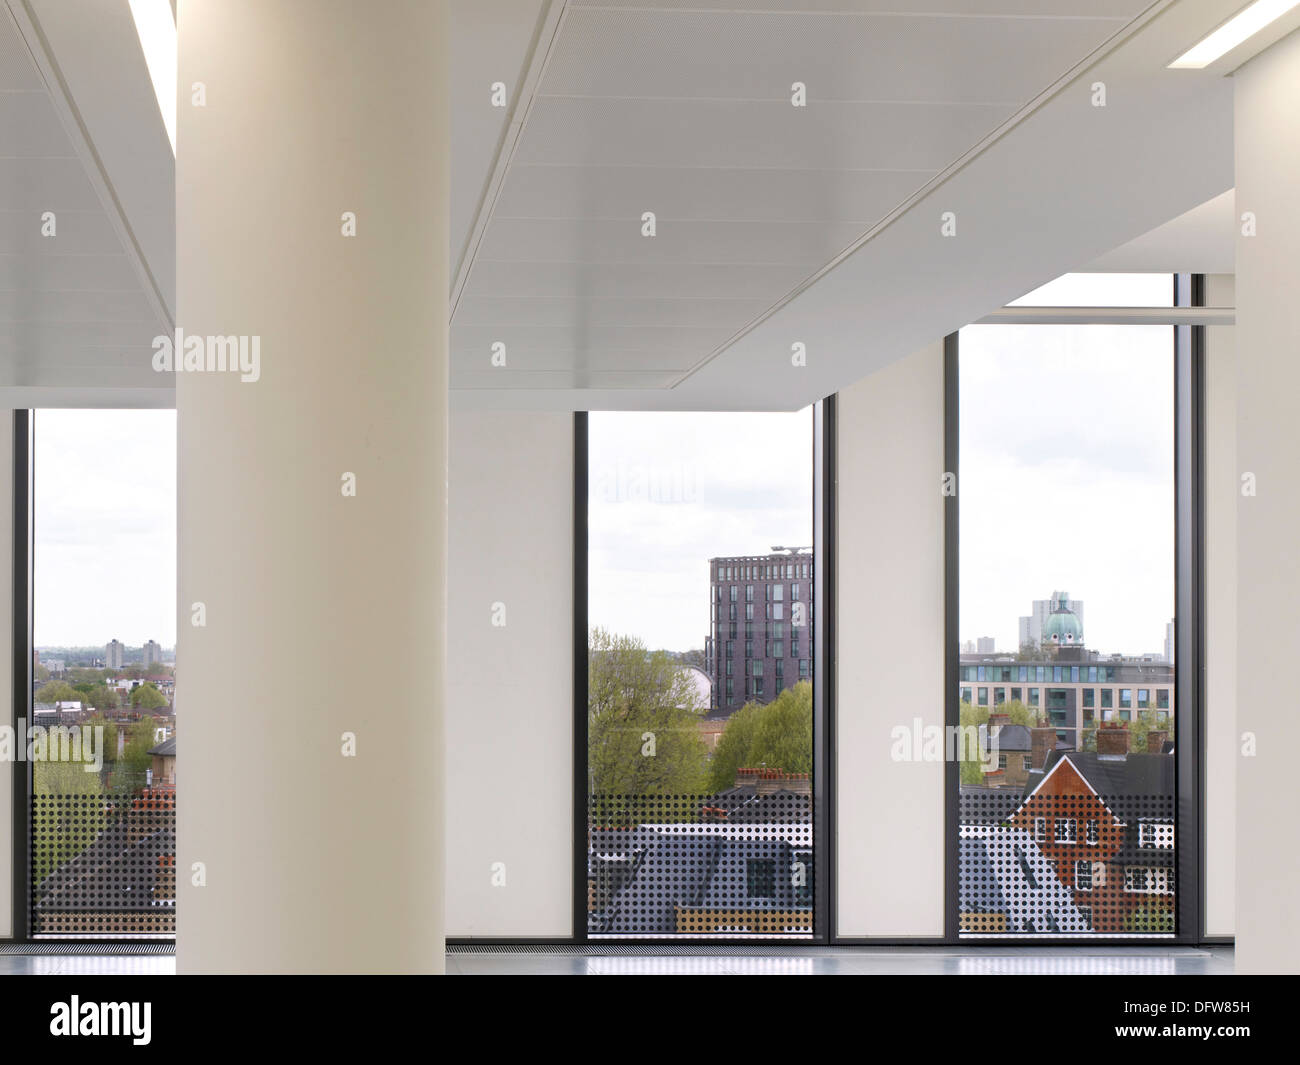 One Valentine Place, London, United Kingdom. Architect: Stiff + Trevillion Architects, 2013. Office interior and view out window Stock Photo